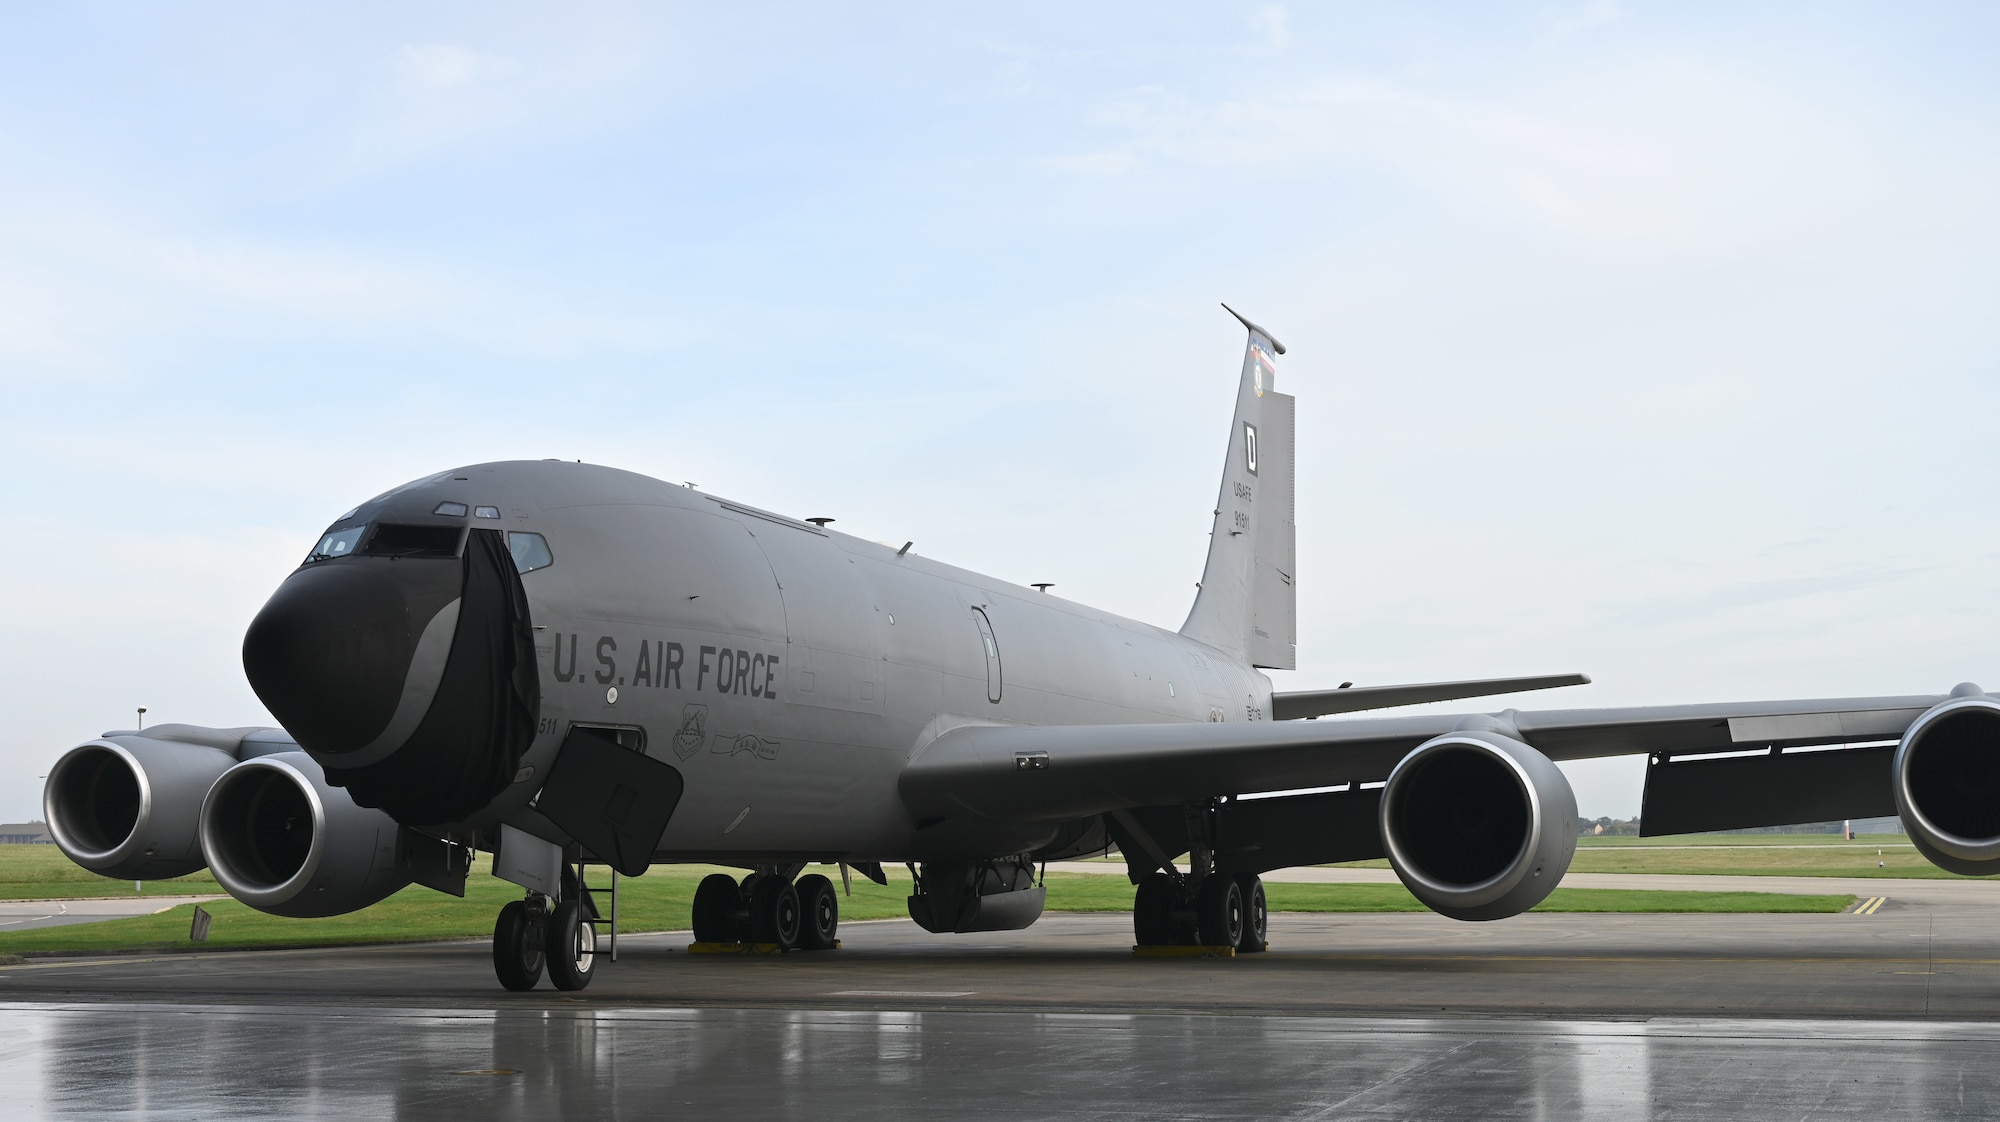 A U.S. Air Force KC-135 Stratotanker, from the 100th Air Refueling Wing, stands ready to have its new heritage nose art – “Squawkin Hawk” – unveiled at a dedication ceremony at Royal Air Force Mildenhall, England, Oct. 10, 2023. The ceremony was held on the 80th anniversary of the infamous Munster, Germany, mission of Oct. 10, 1943, when the 100th Bomb Group suffered its greatest loss of aircraft and crew; 12 aircraft and 121 crew perished in the skies over Germany, and it earned its infamous moniker, the “Bloody Hundredth.” (U.S. Air Force photo by Karen Abeyasekere)